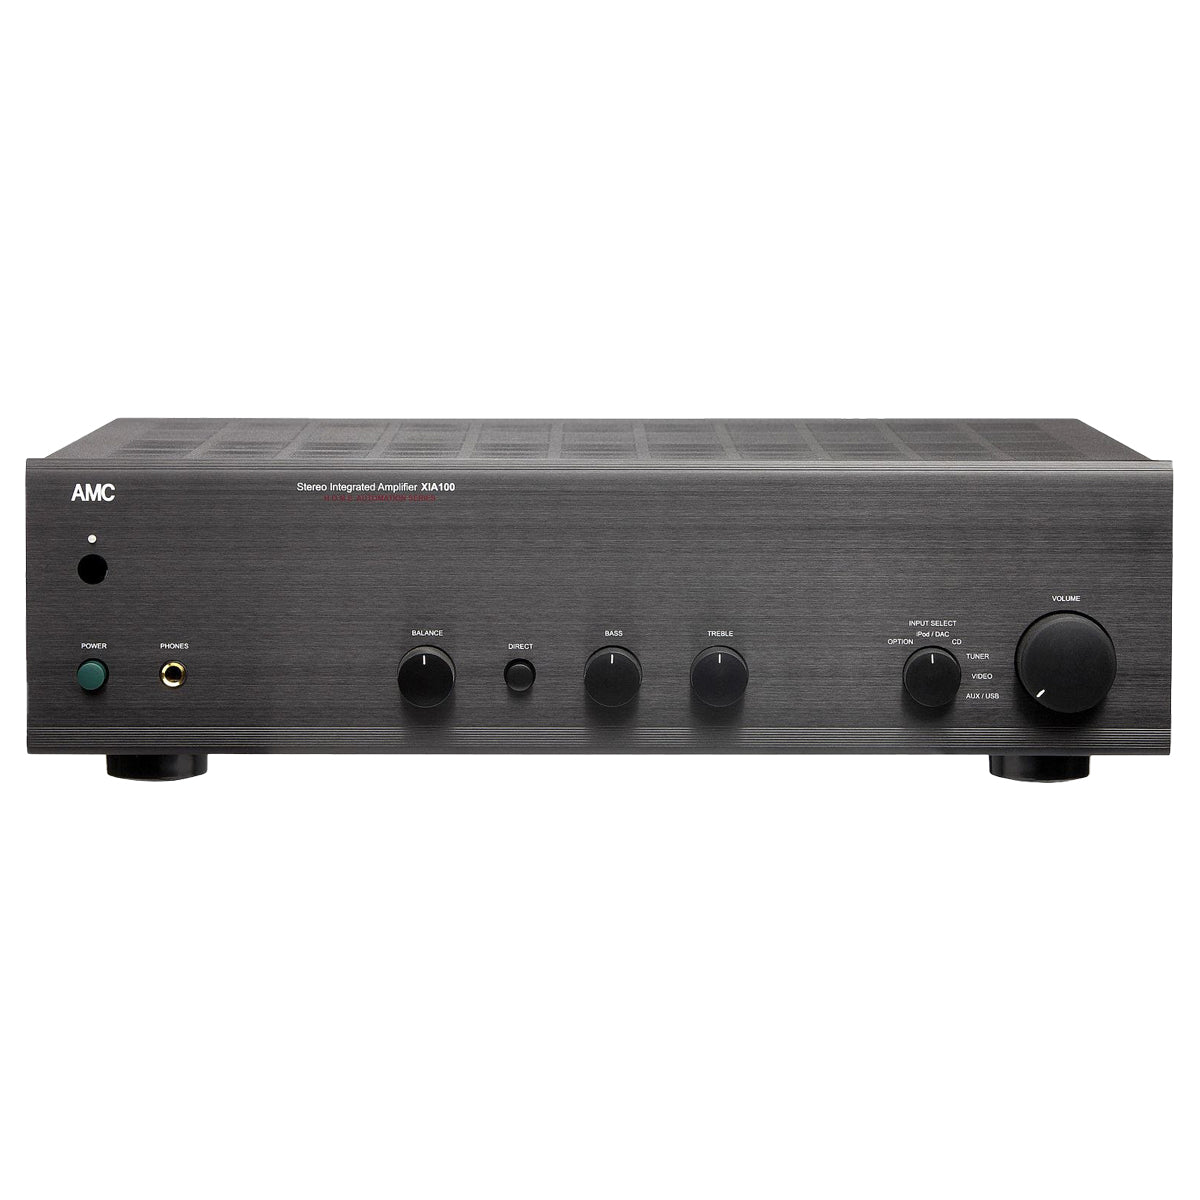 AMC XIA 100 Stereo Amplifier - Black - The Audio Experts